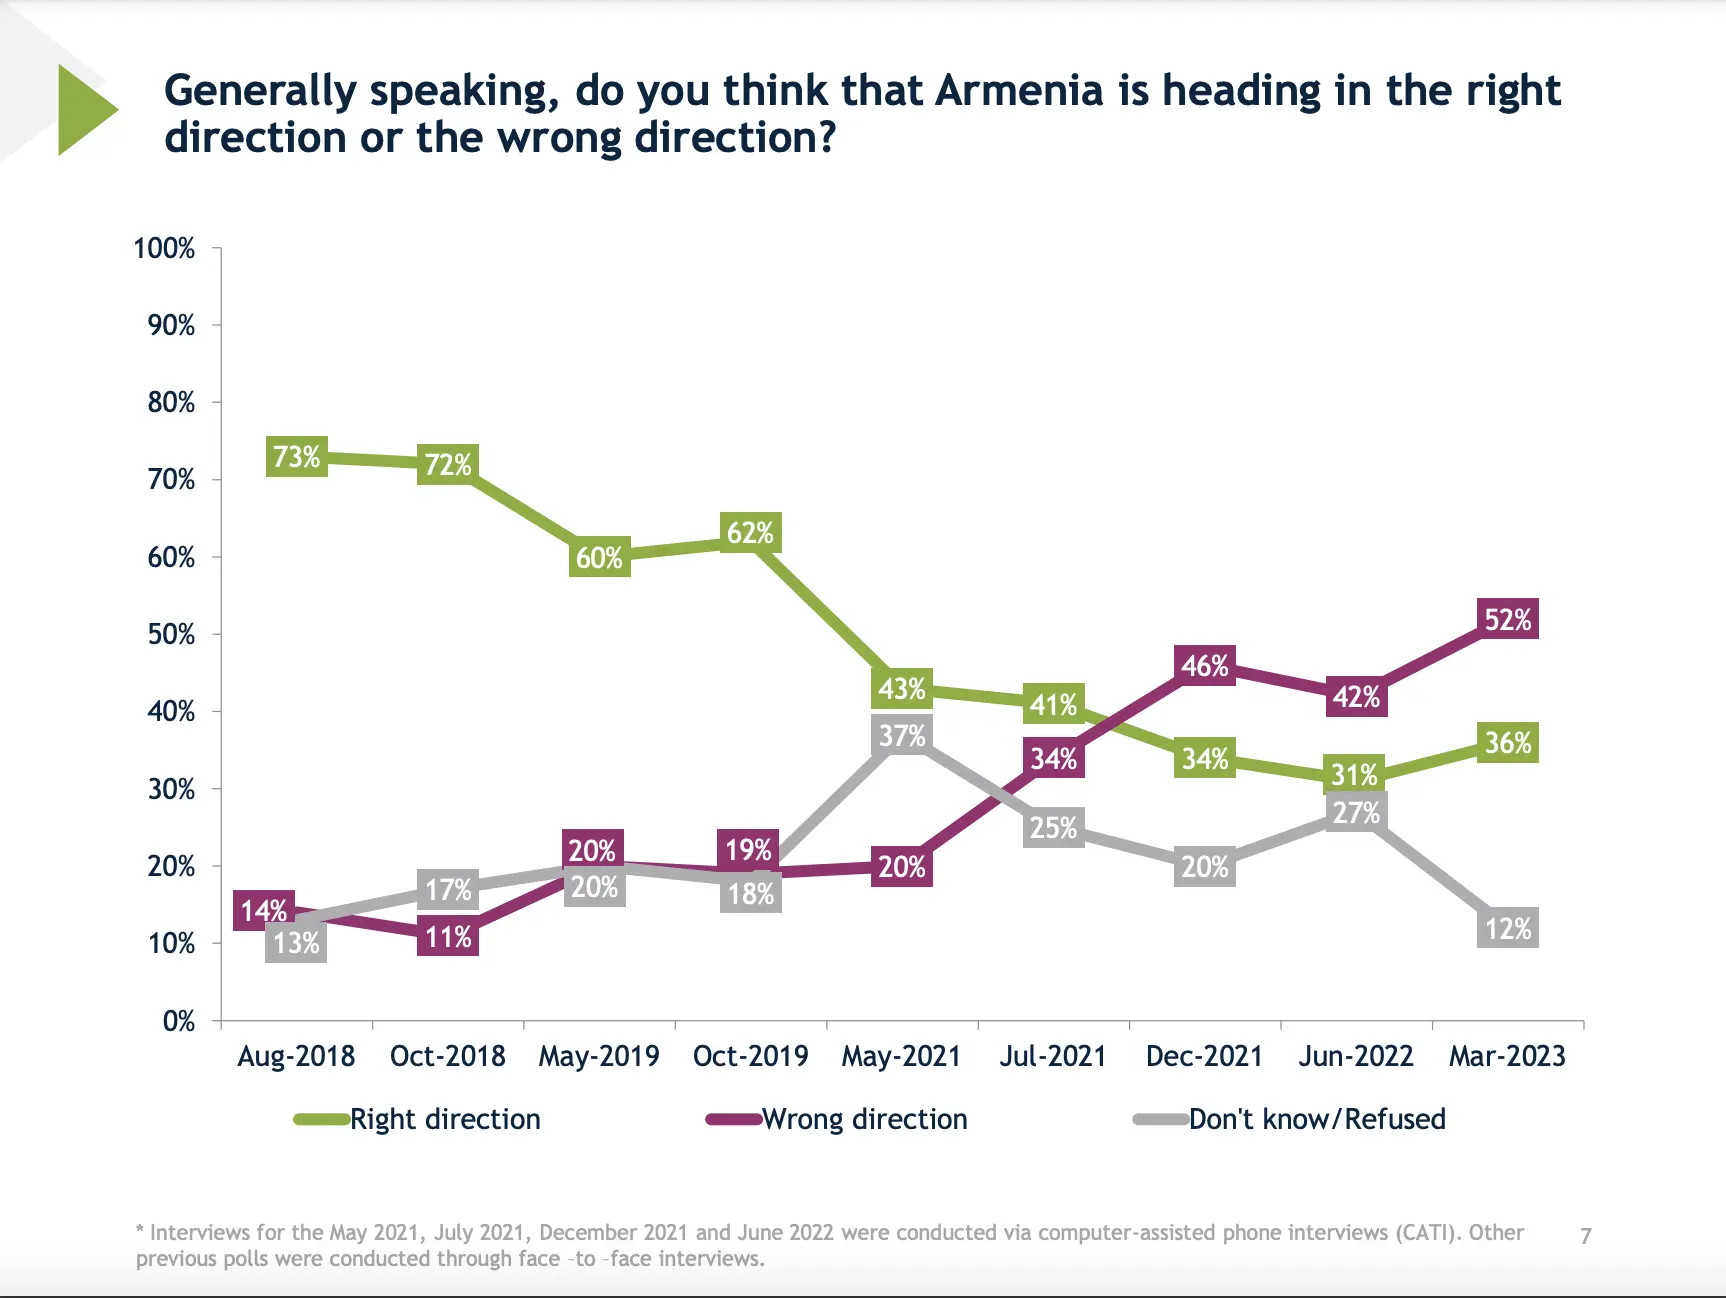 Is Armenia heading in the right direction or the wrong direction